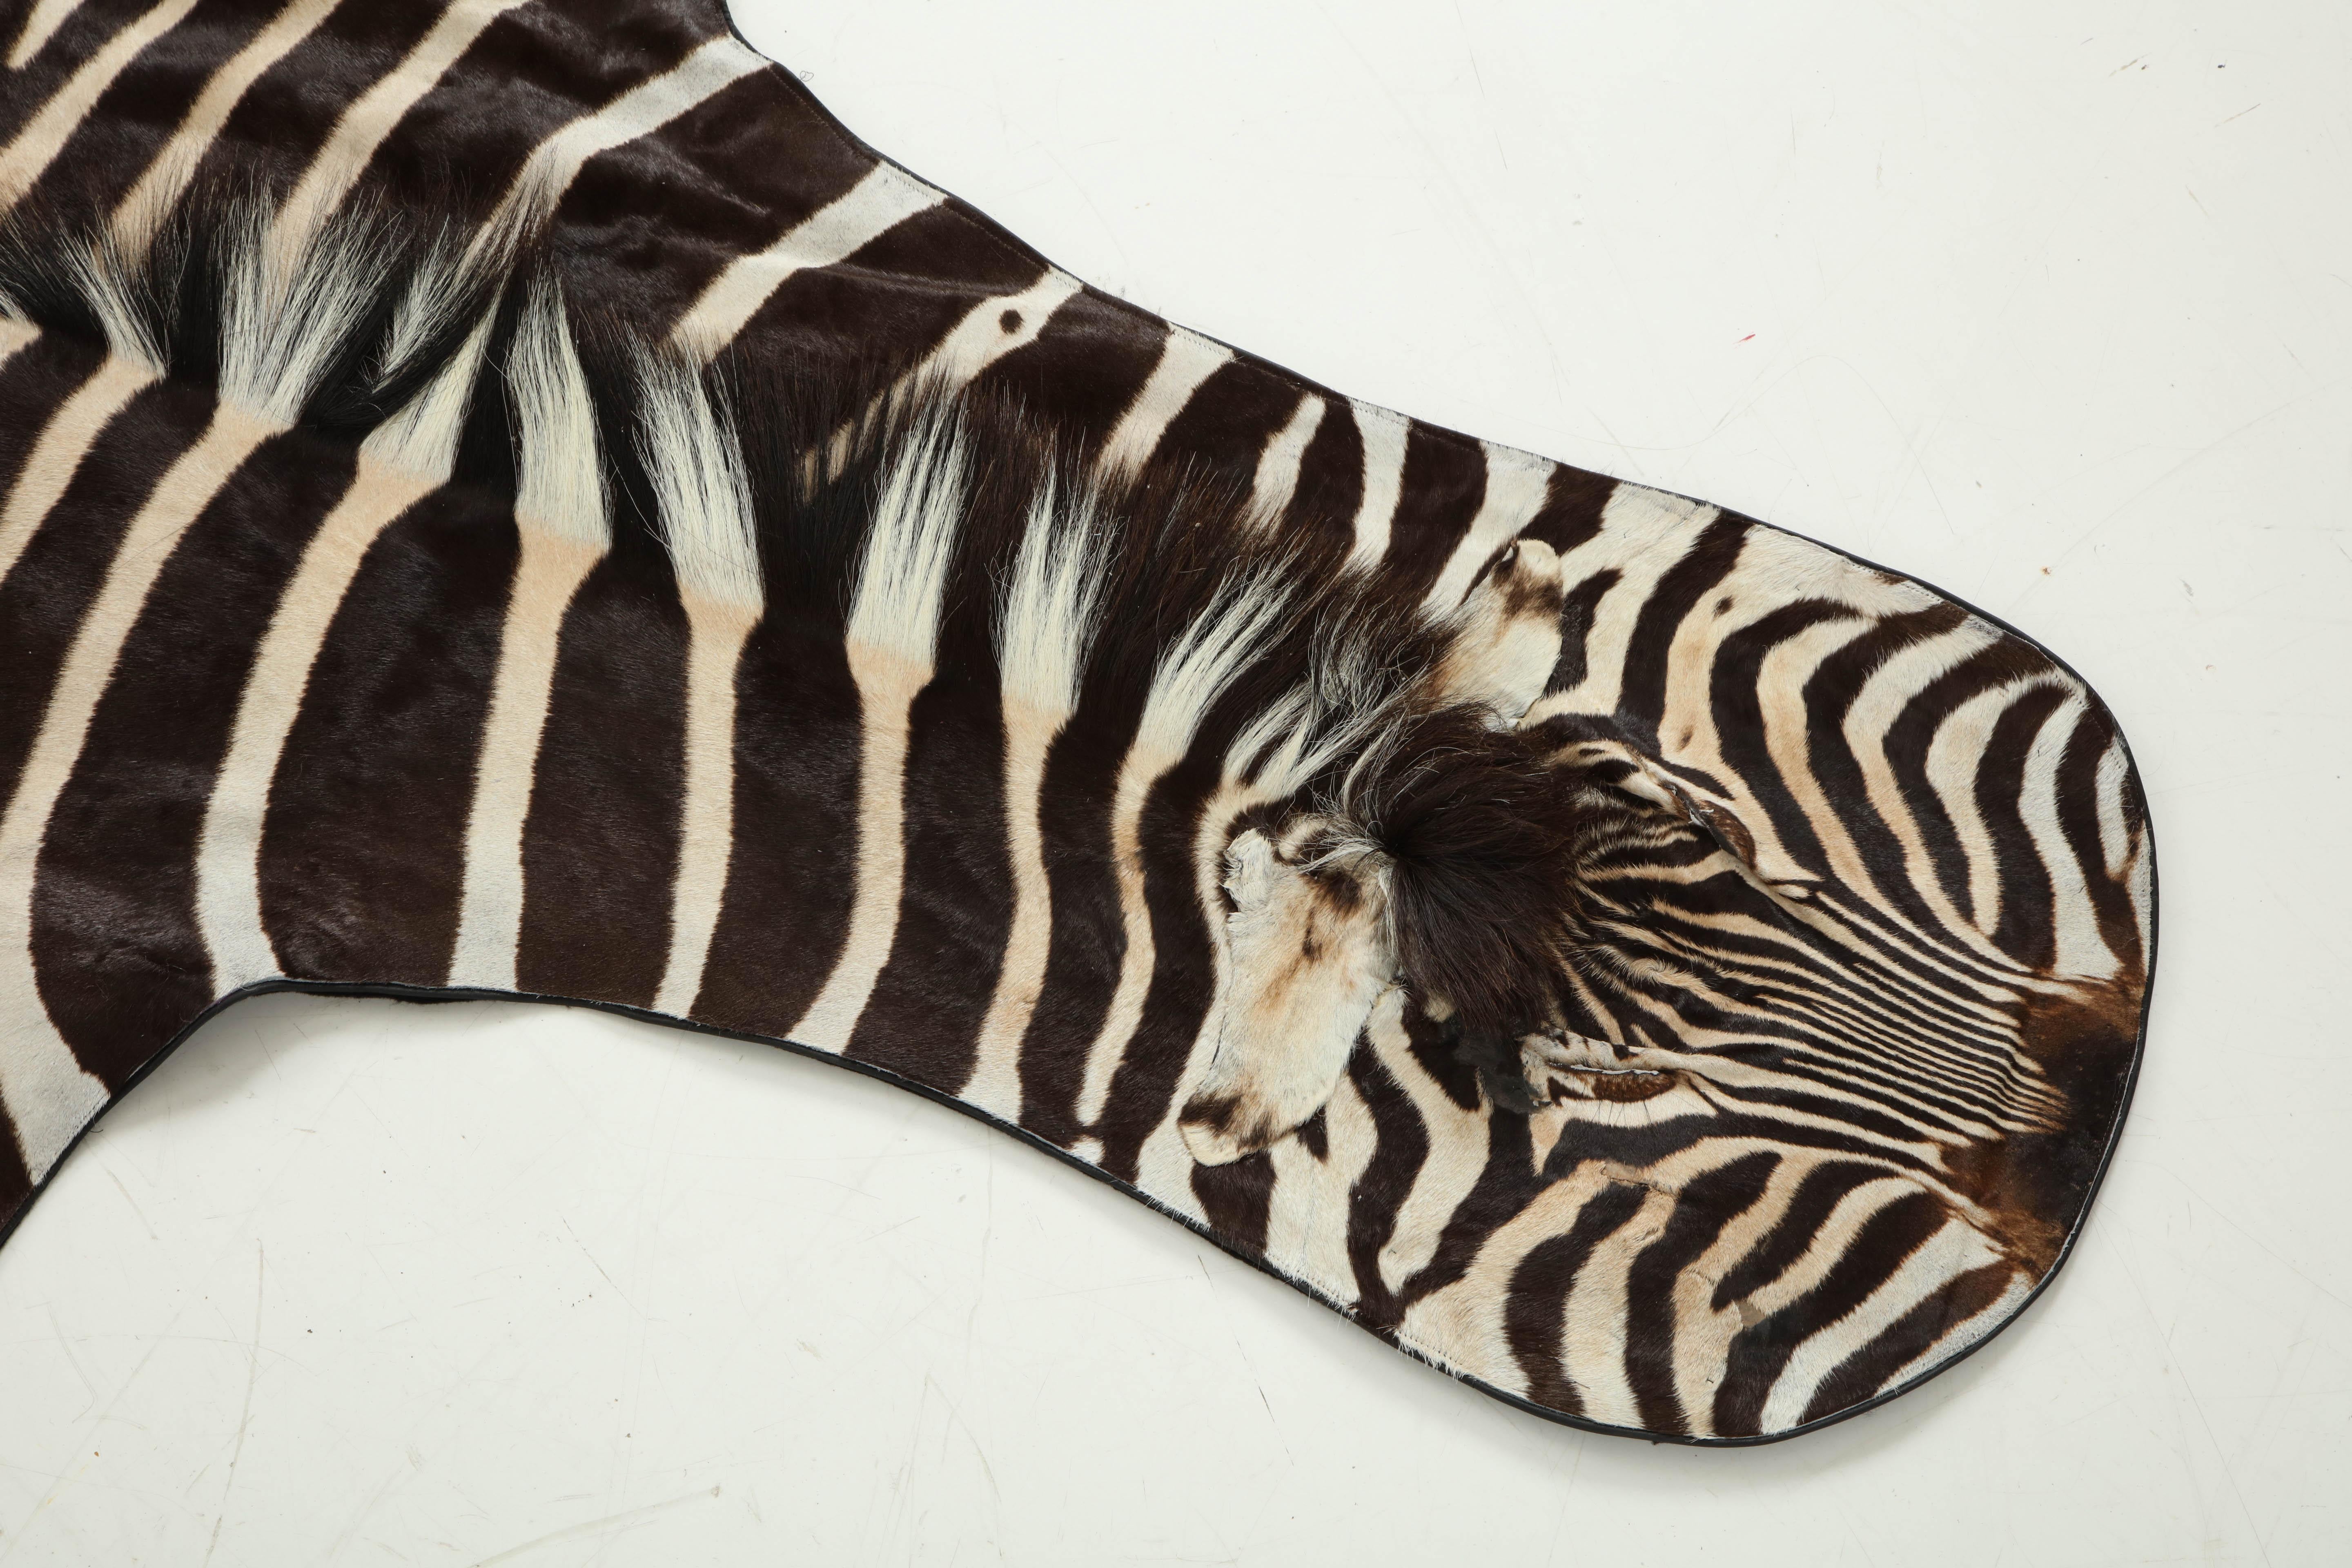 Decorative zebra hide backed with wool felt and trimmed around the edges with a leather trim.